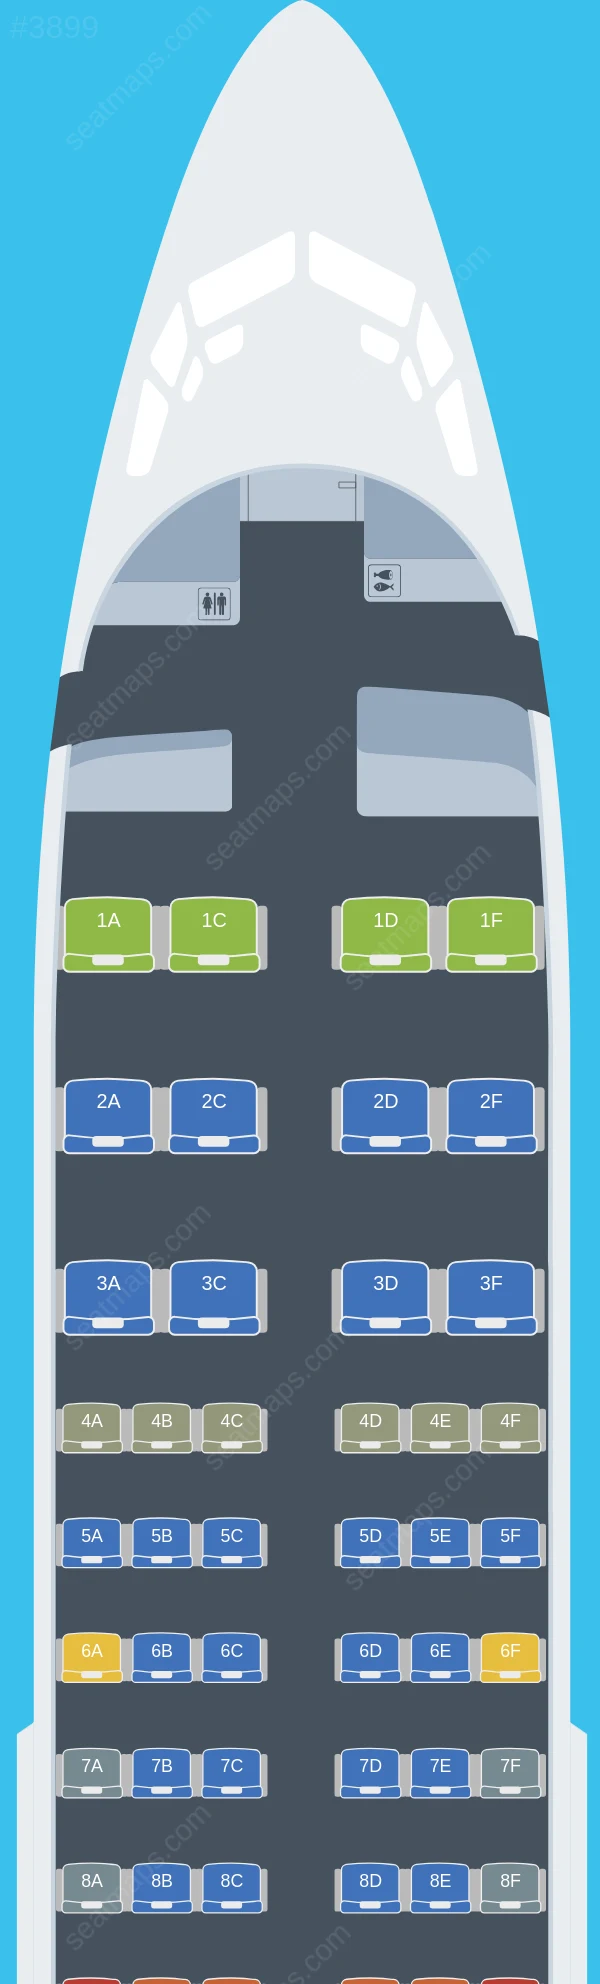 TAAG Angola Boeing 737-700 seatmap preview